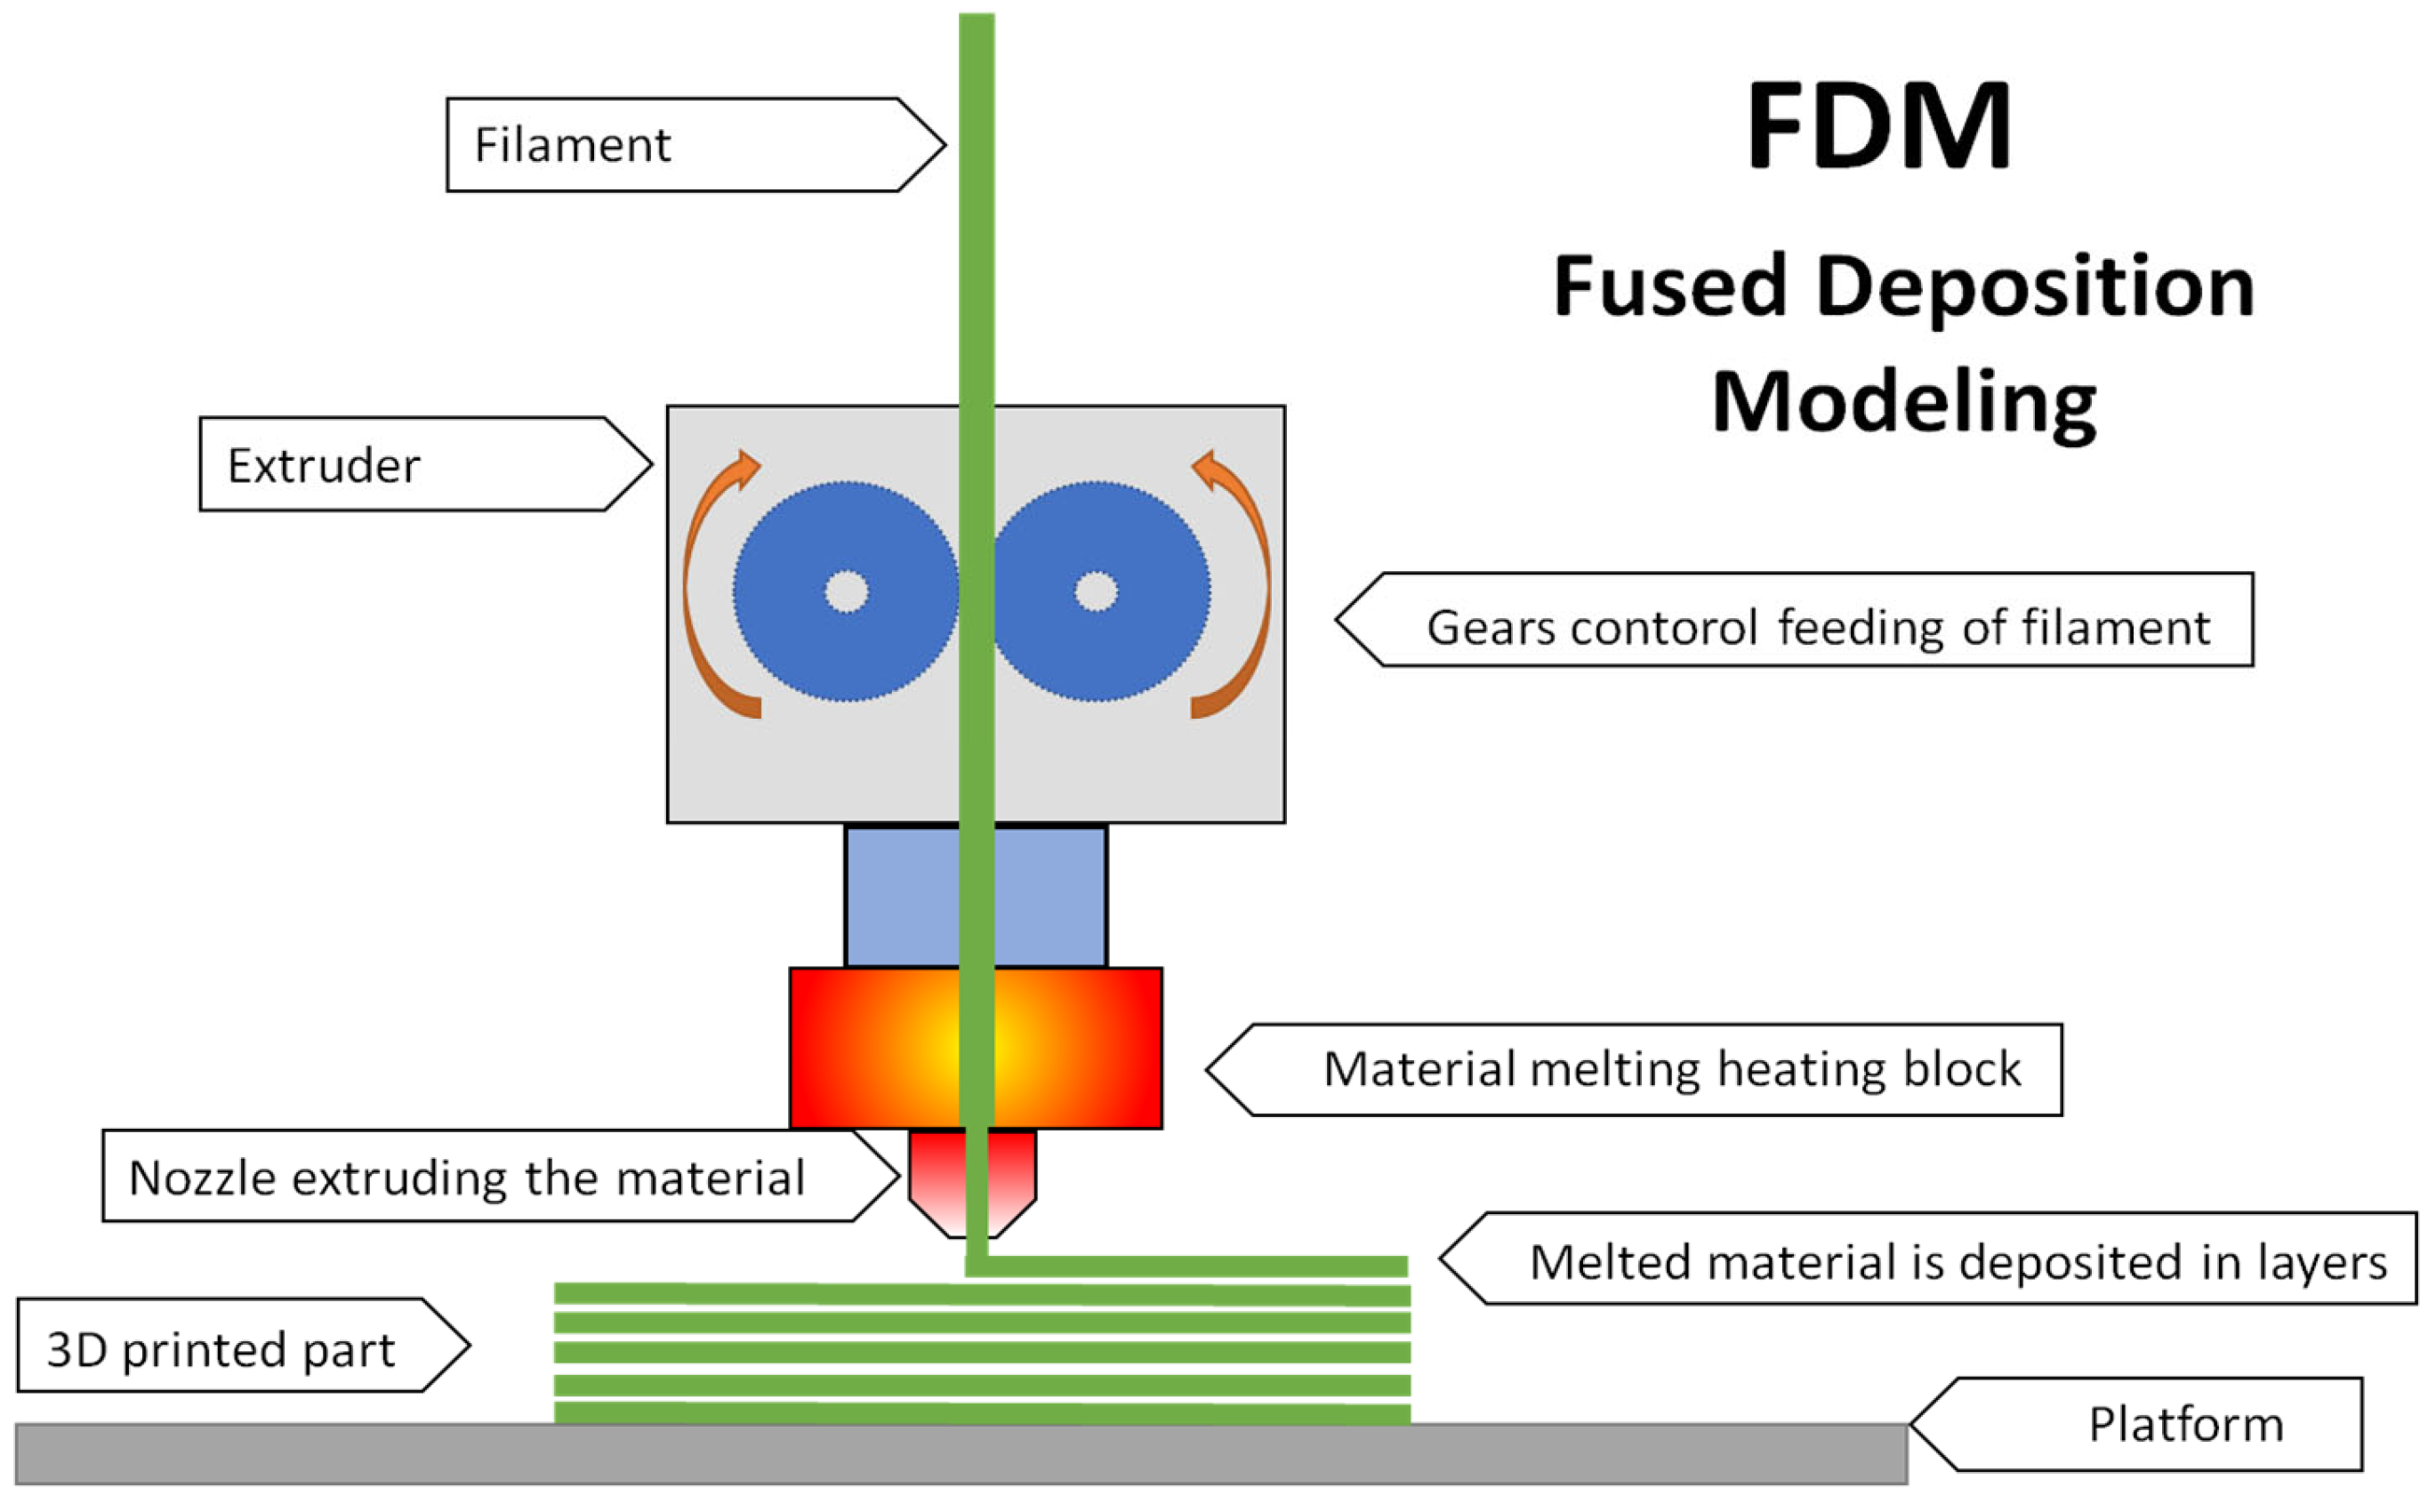 Integrating a fused deposition modeling 3D printing design with